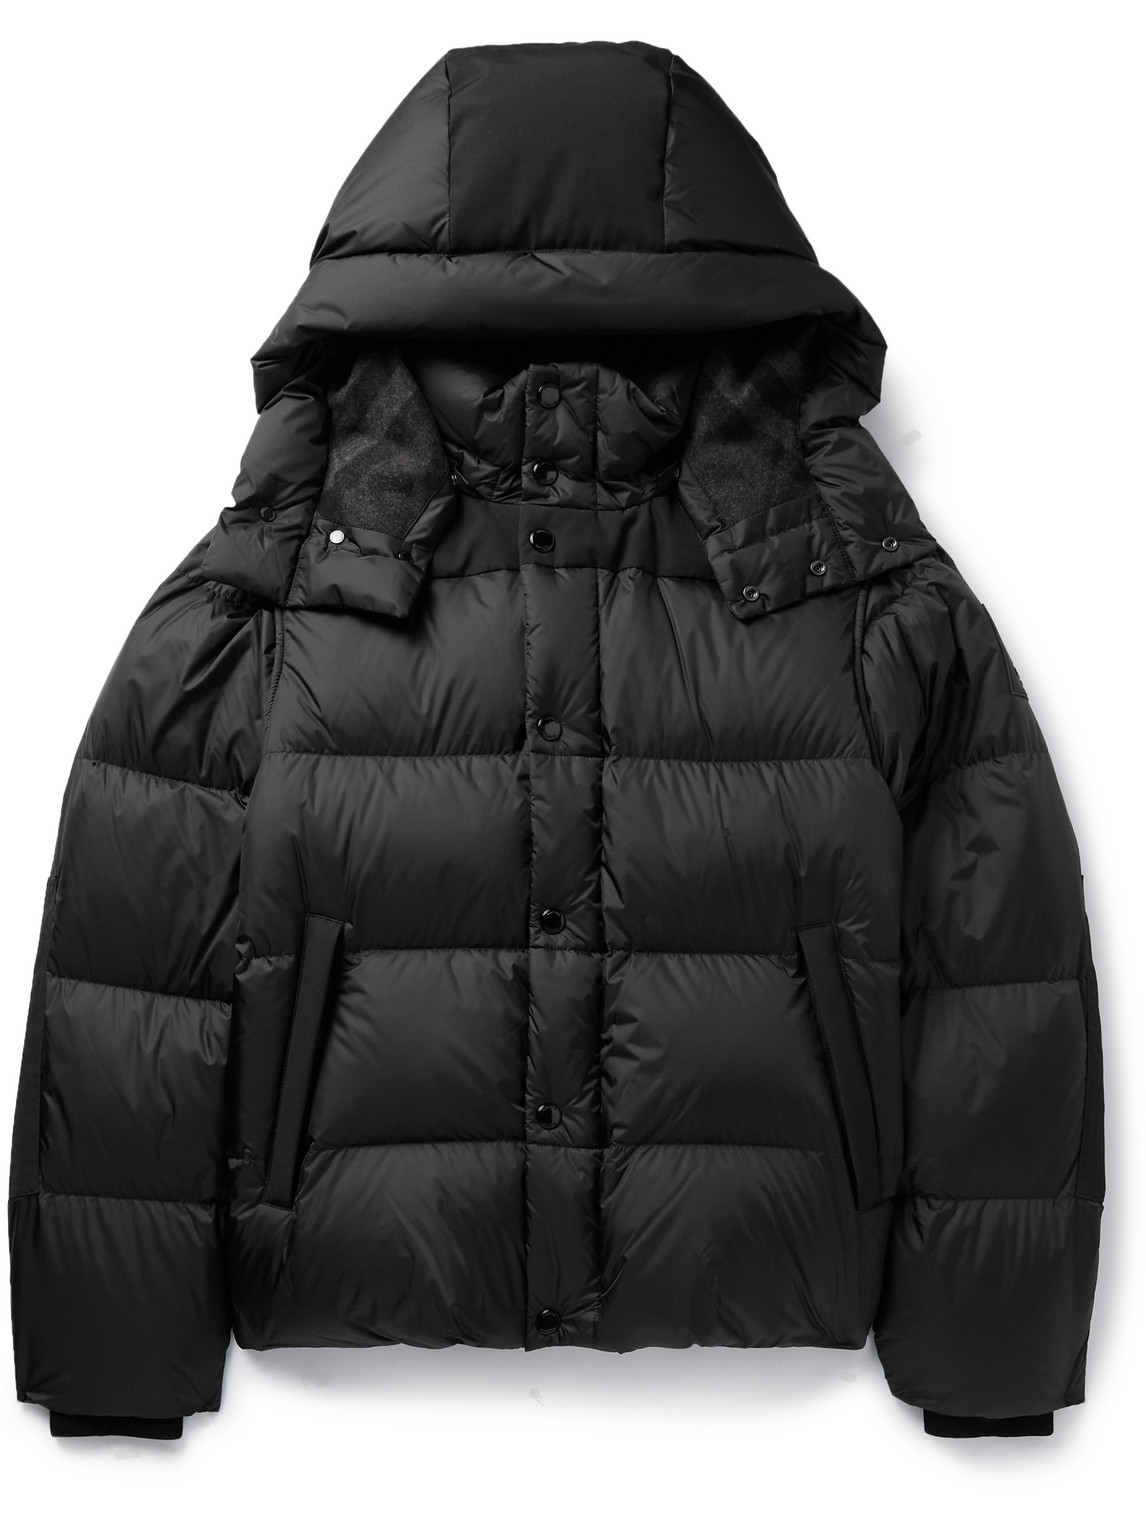 Burberry - Convertible Quilted Shell Hooded Down Jacket - Men - Black - L von Burberry